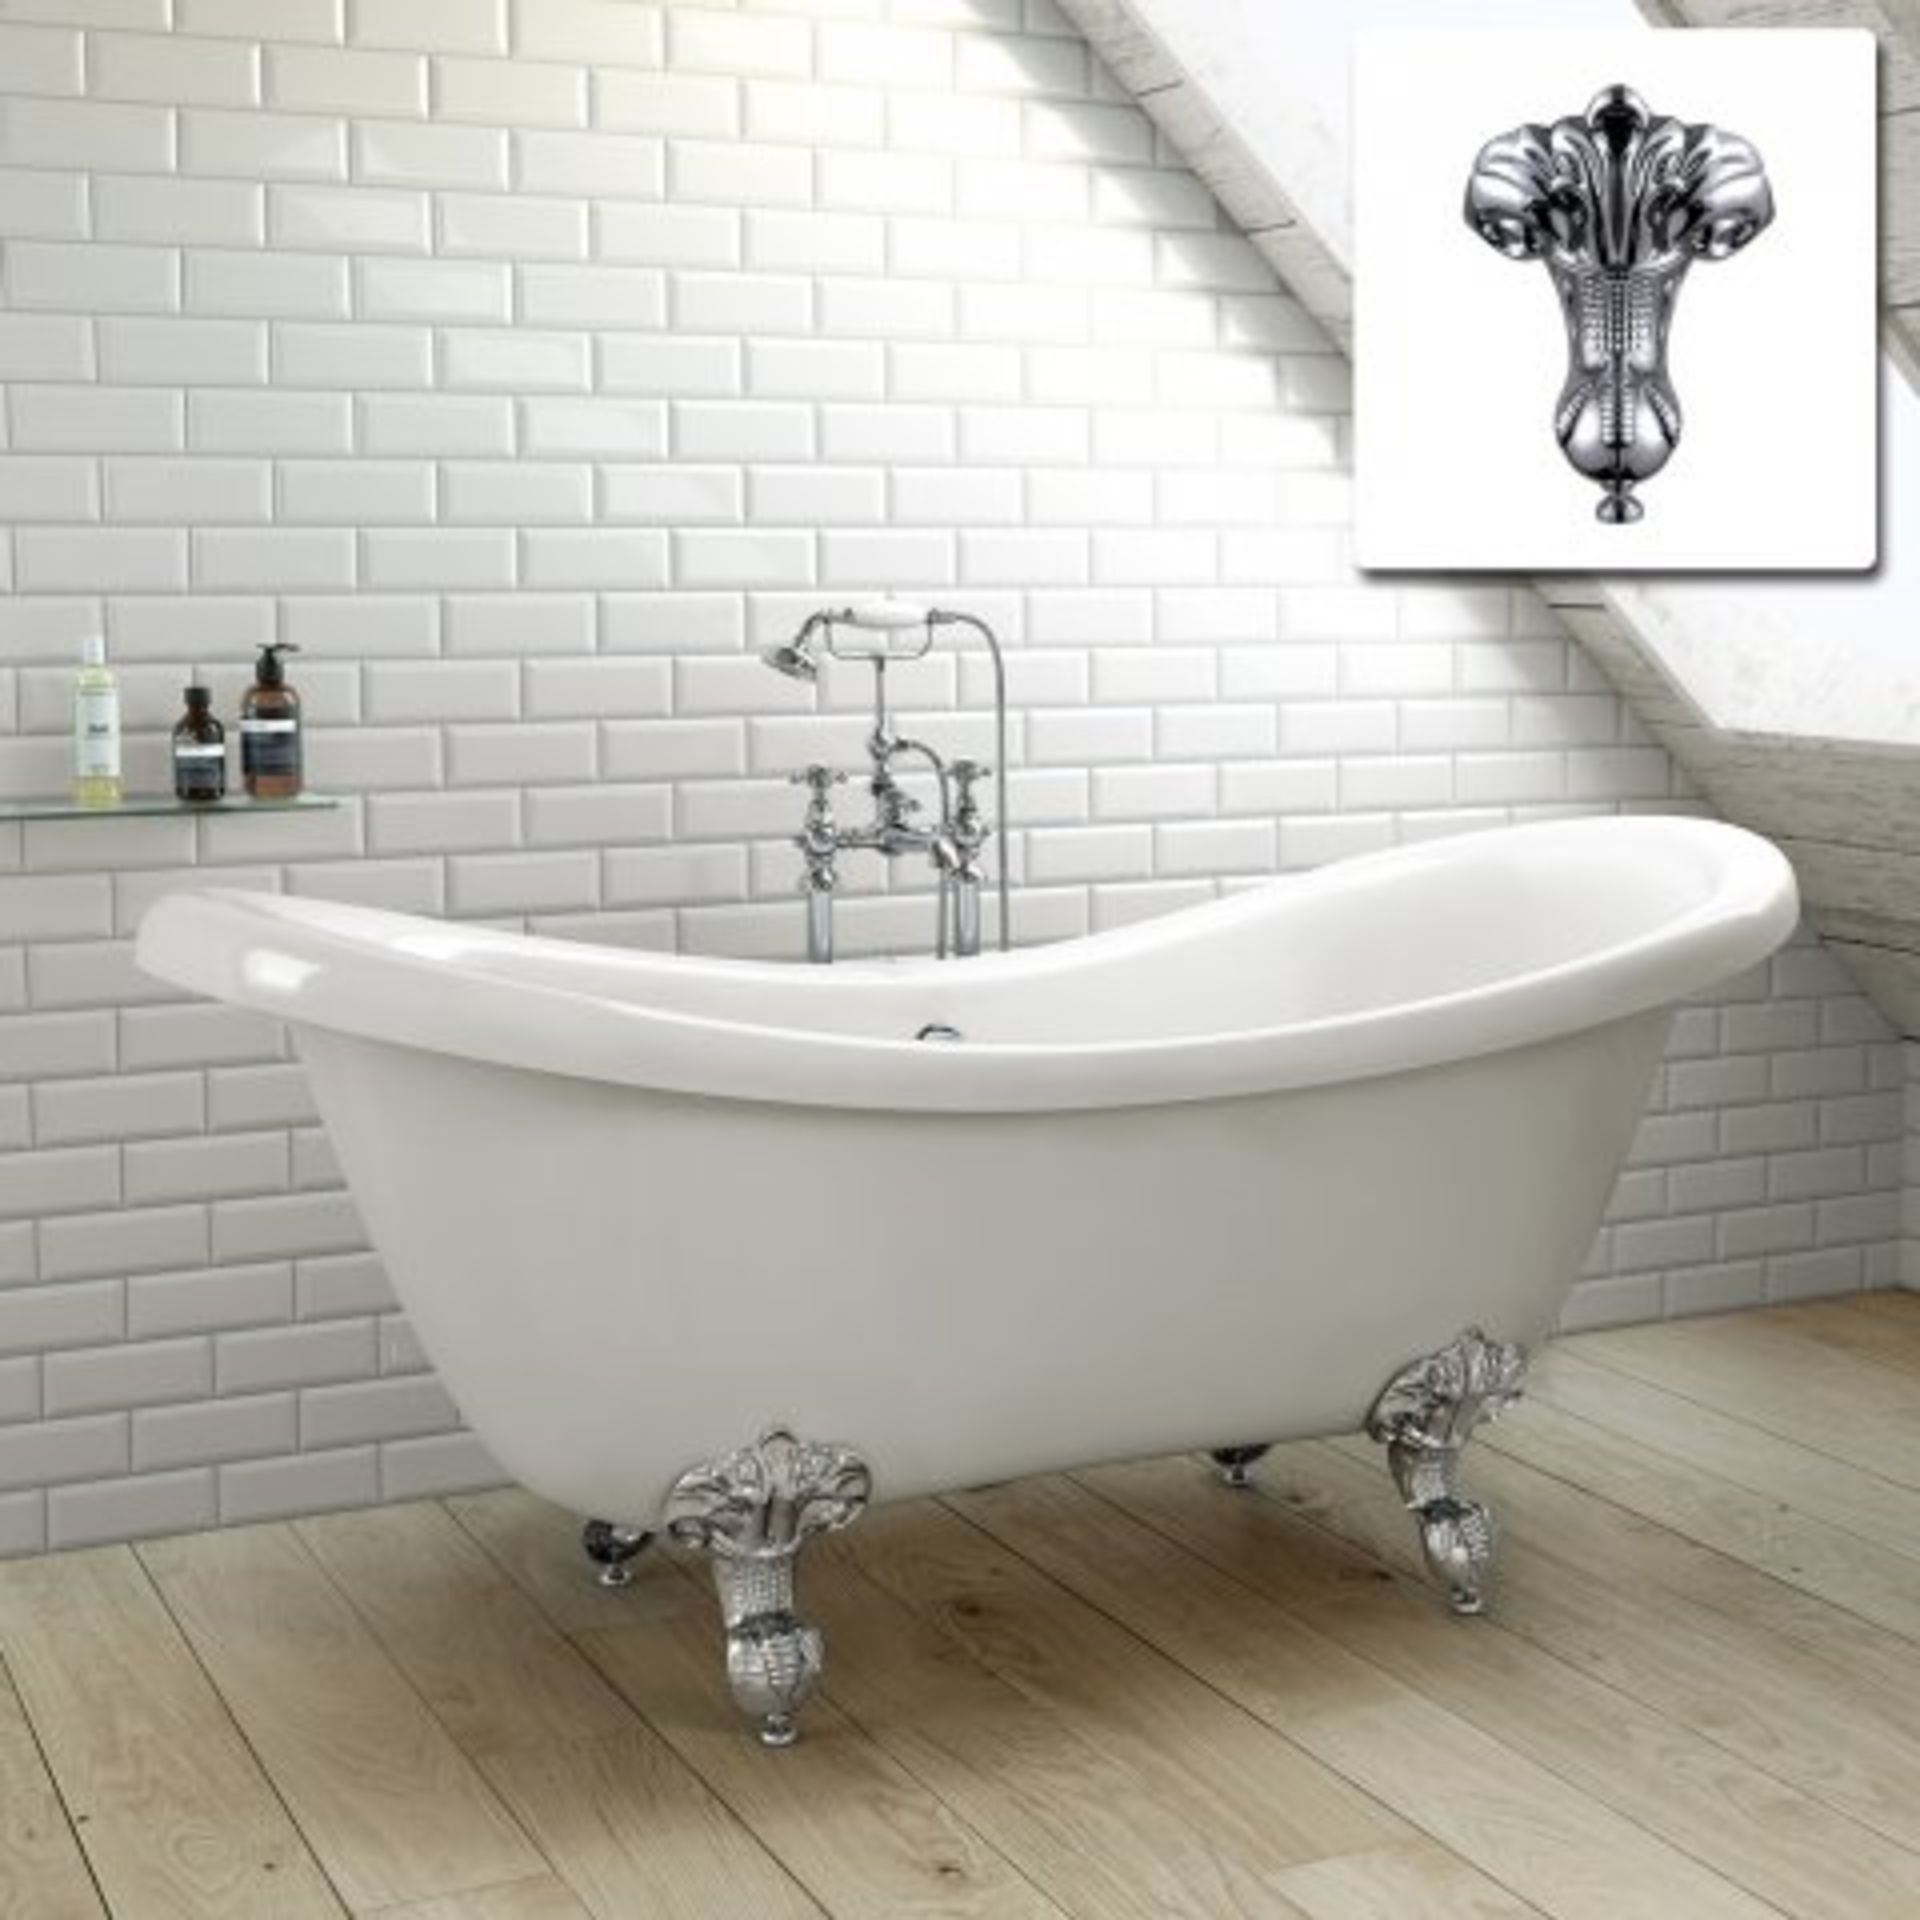 (O5) 1760mm Victoria Traditional Roll Top Double Slipper Bath - Ball Feet - Large. RRP £799.99.